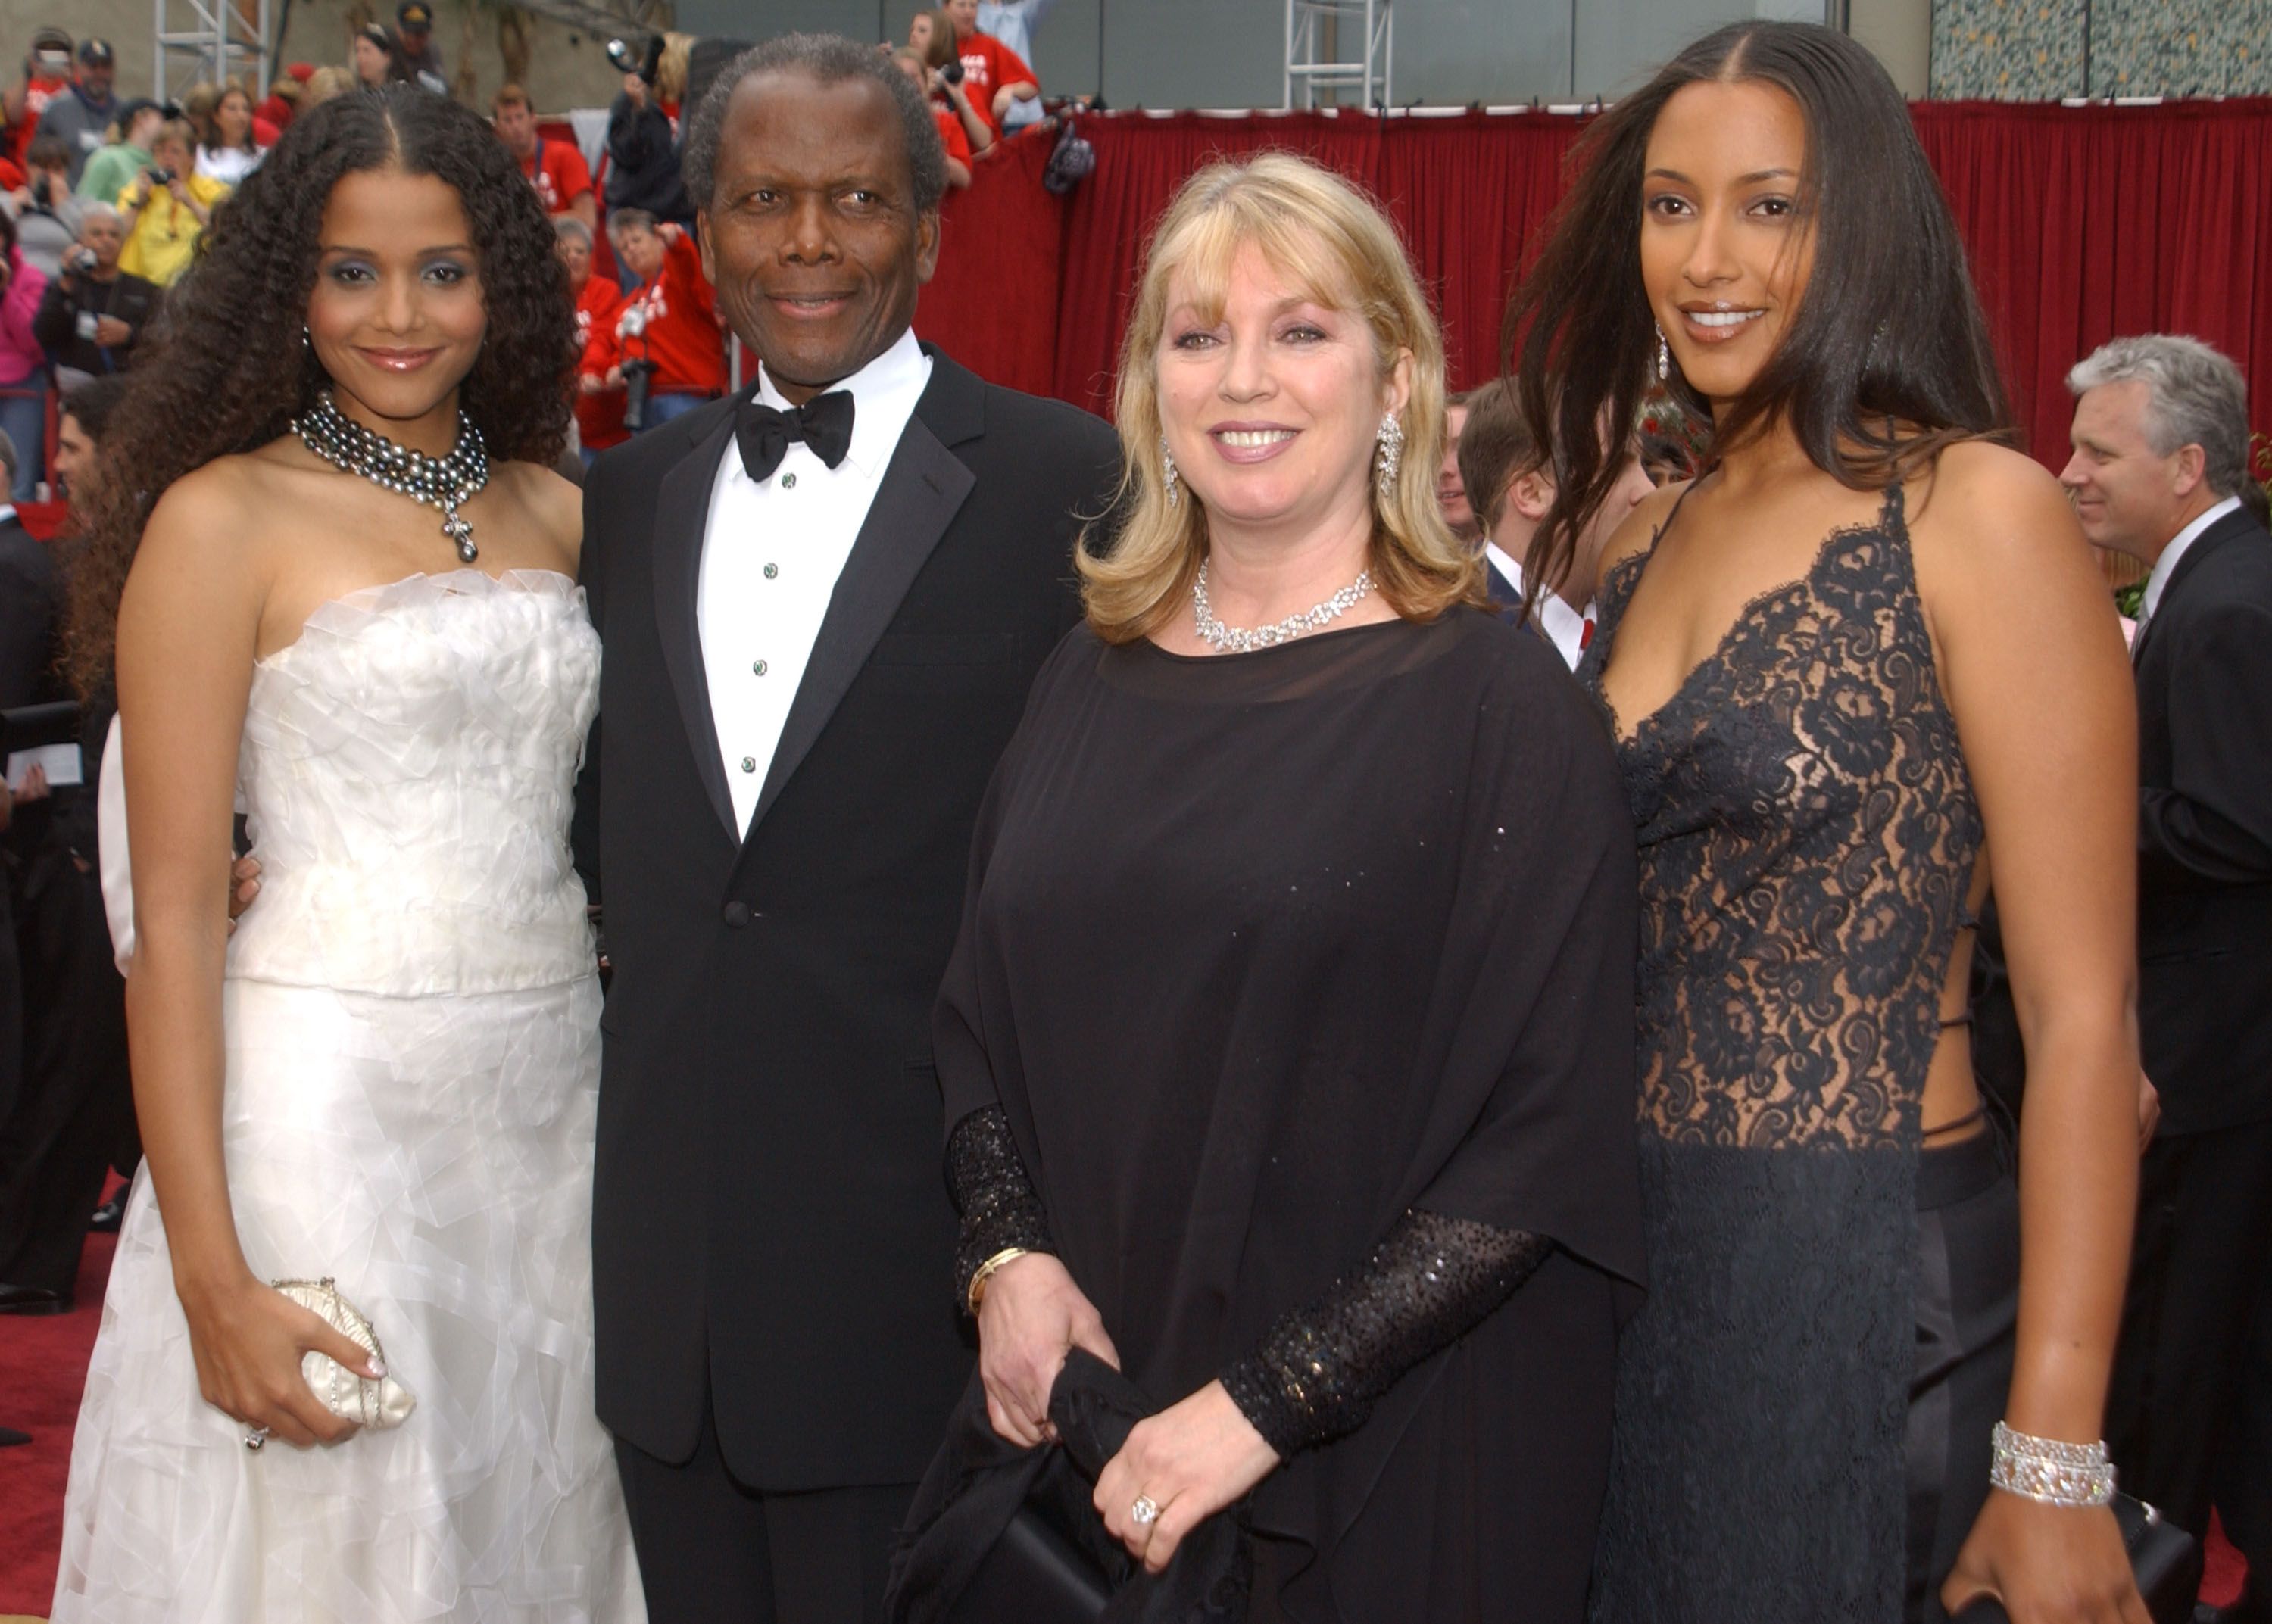 Sidney Poitier, Joanna Shimkus, and daughters Sidney and Anika during a red carpet event | Source: Getty Images